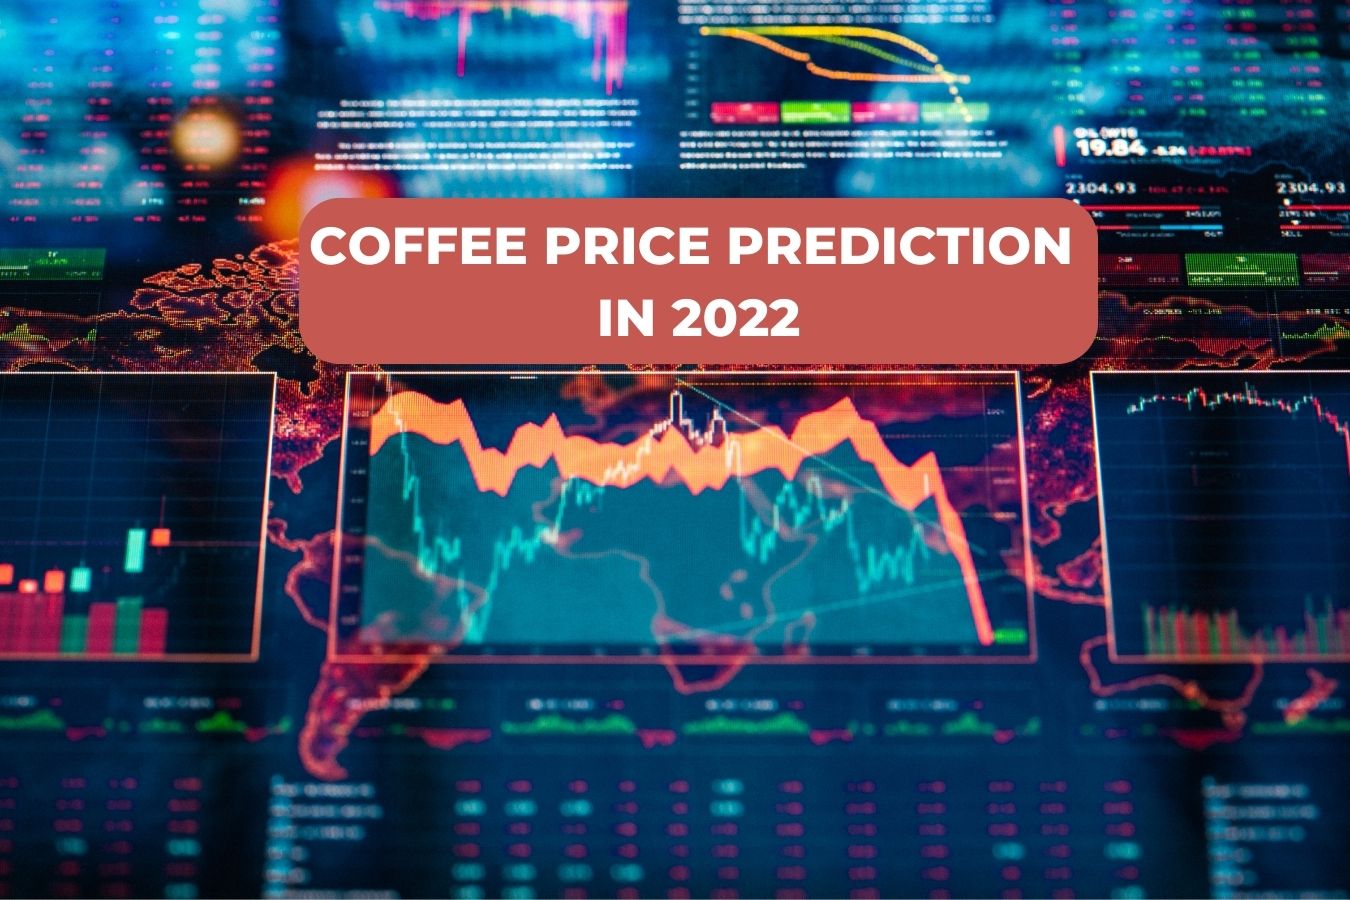 Coffee Price Forecast Next Week And Coffee Price Prediction In 2022